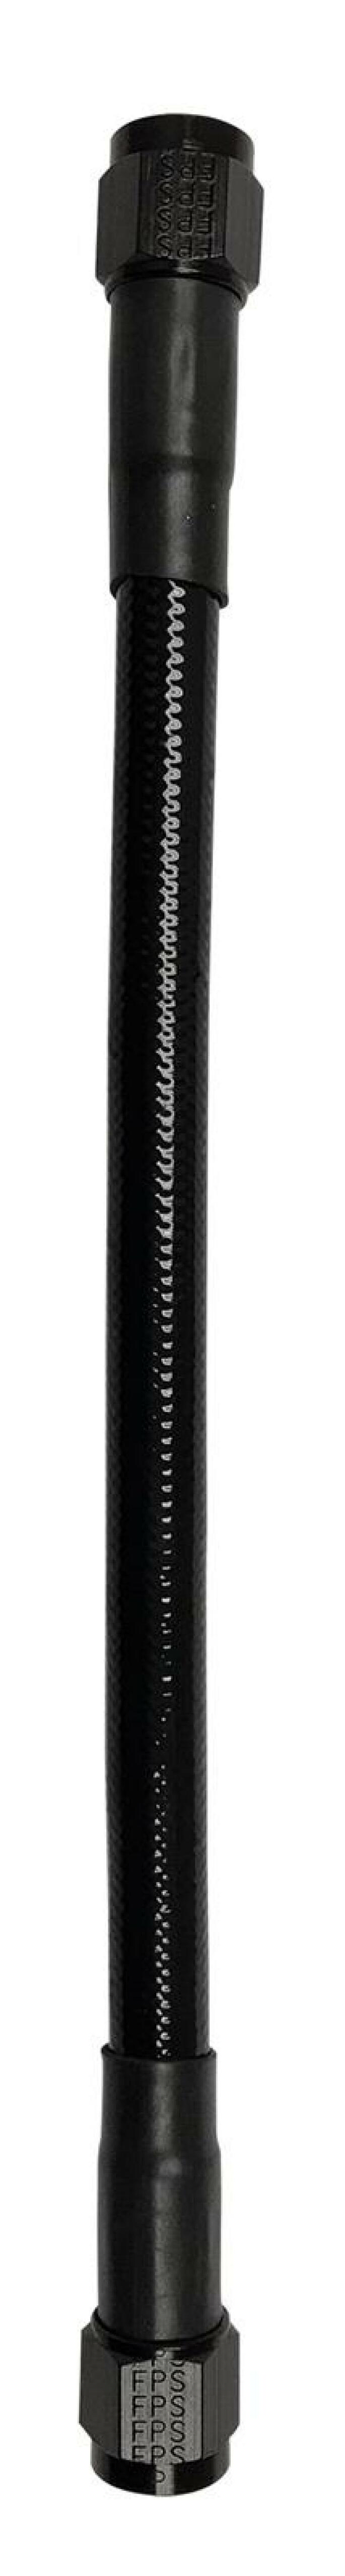 Fragola -6AN Ext Black PTFE Hose Assembly Straight x Straight 16in - 6026-1-1-16BL